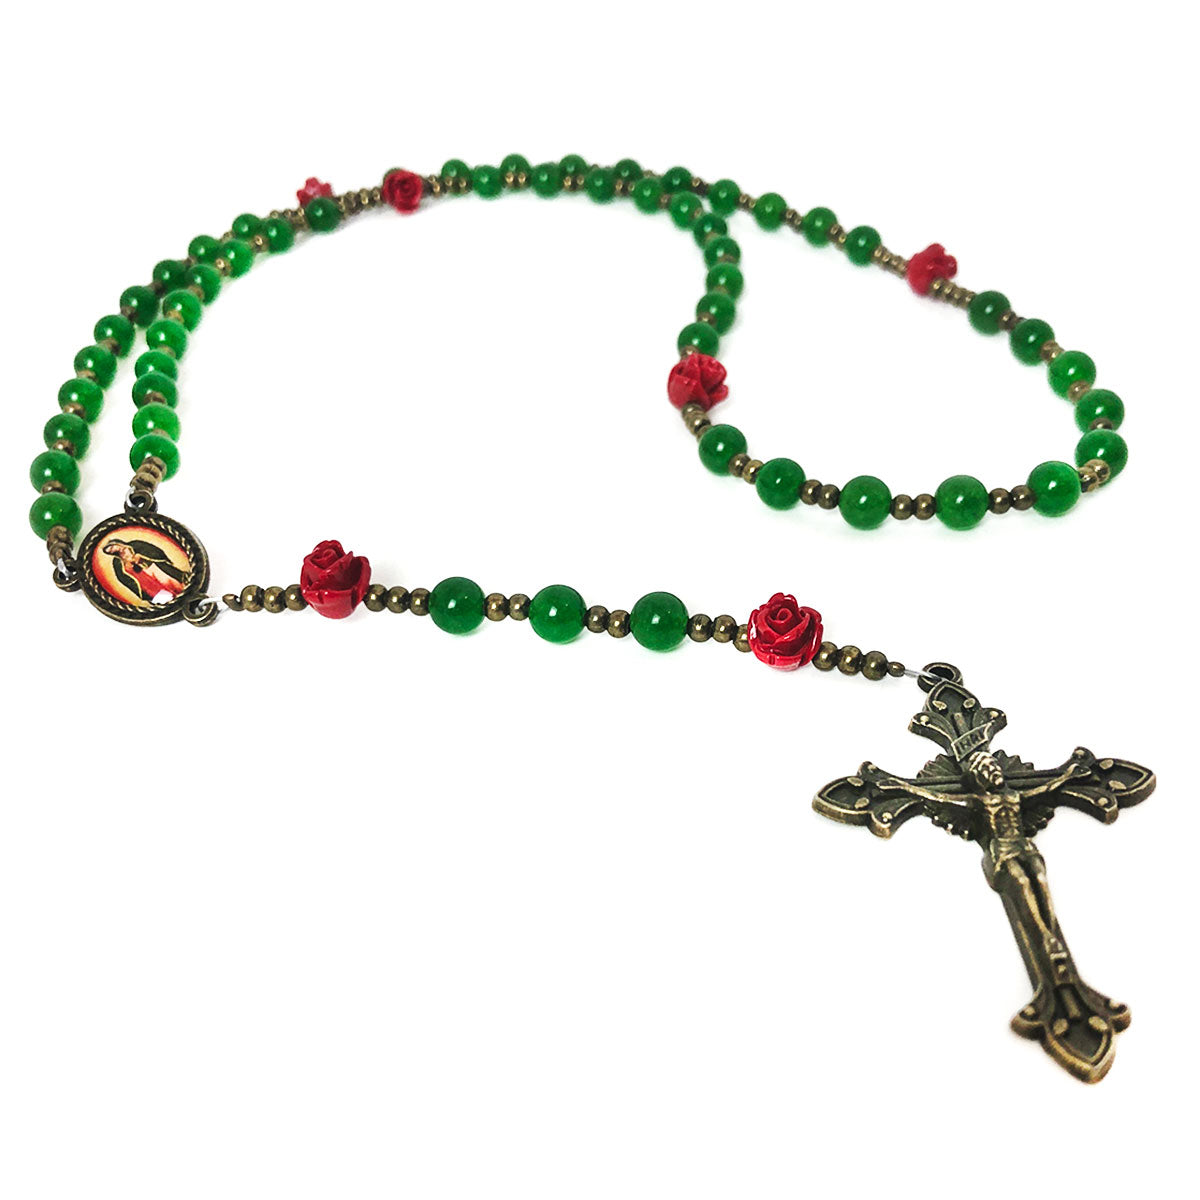 Catholic Heirlooms Our Lady Of Guadalupe Emerald Green Jade Stone Red Rose Rosary